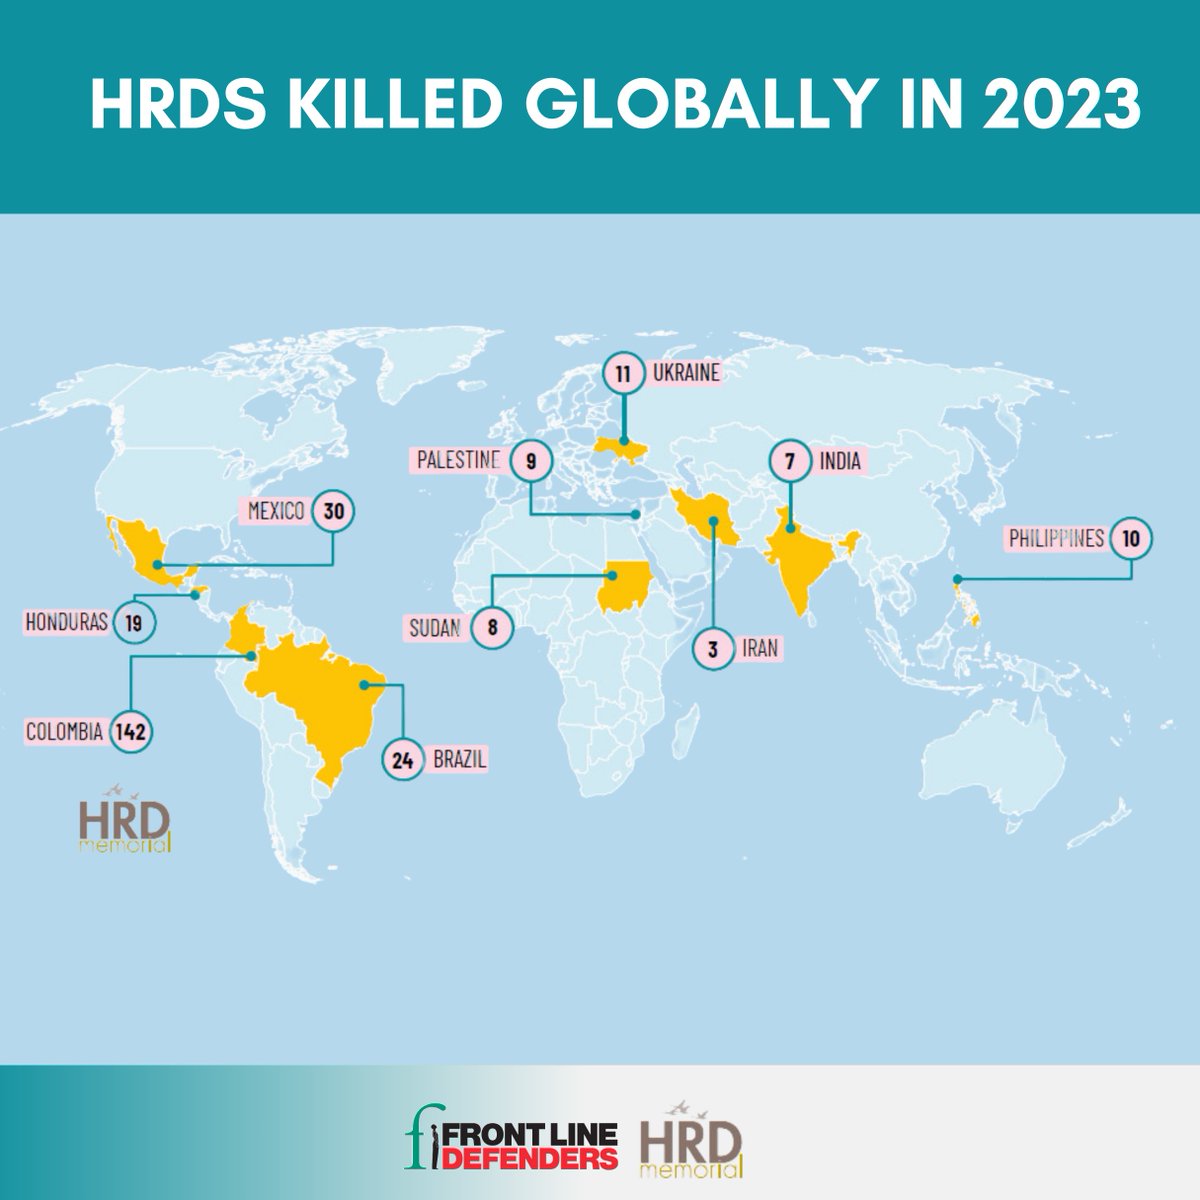 🚨 @HRD_Memorial found that at least 300 HRDs were killed in 2023, in an attempt to silence their peaceful human rights work. Read more about our analysis on these killings in the Front Line  Defenders Global Analysis 2023:

zurl.co/n45x?utm_sourc…